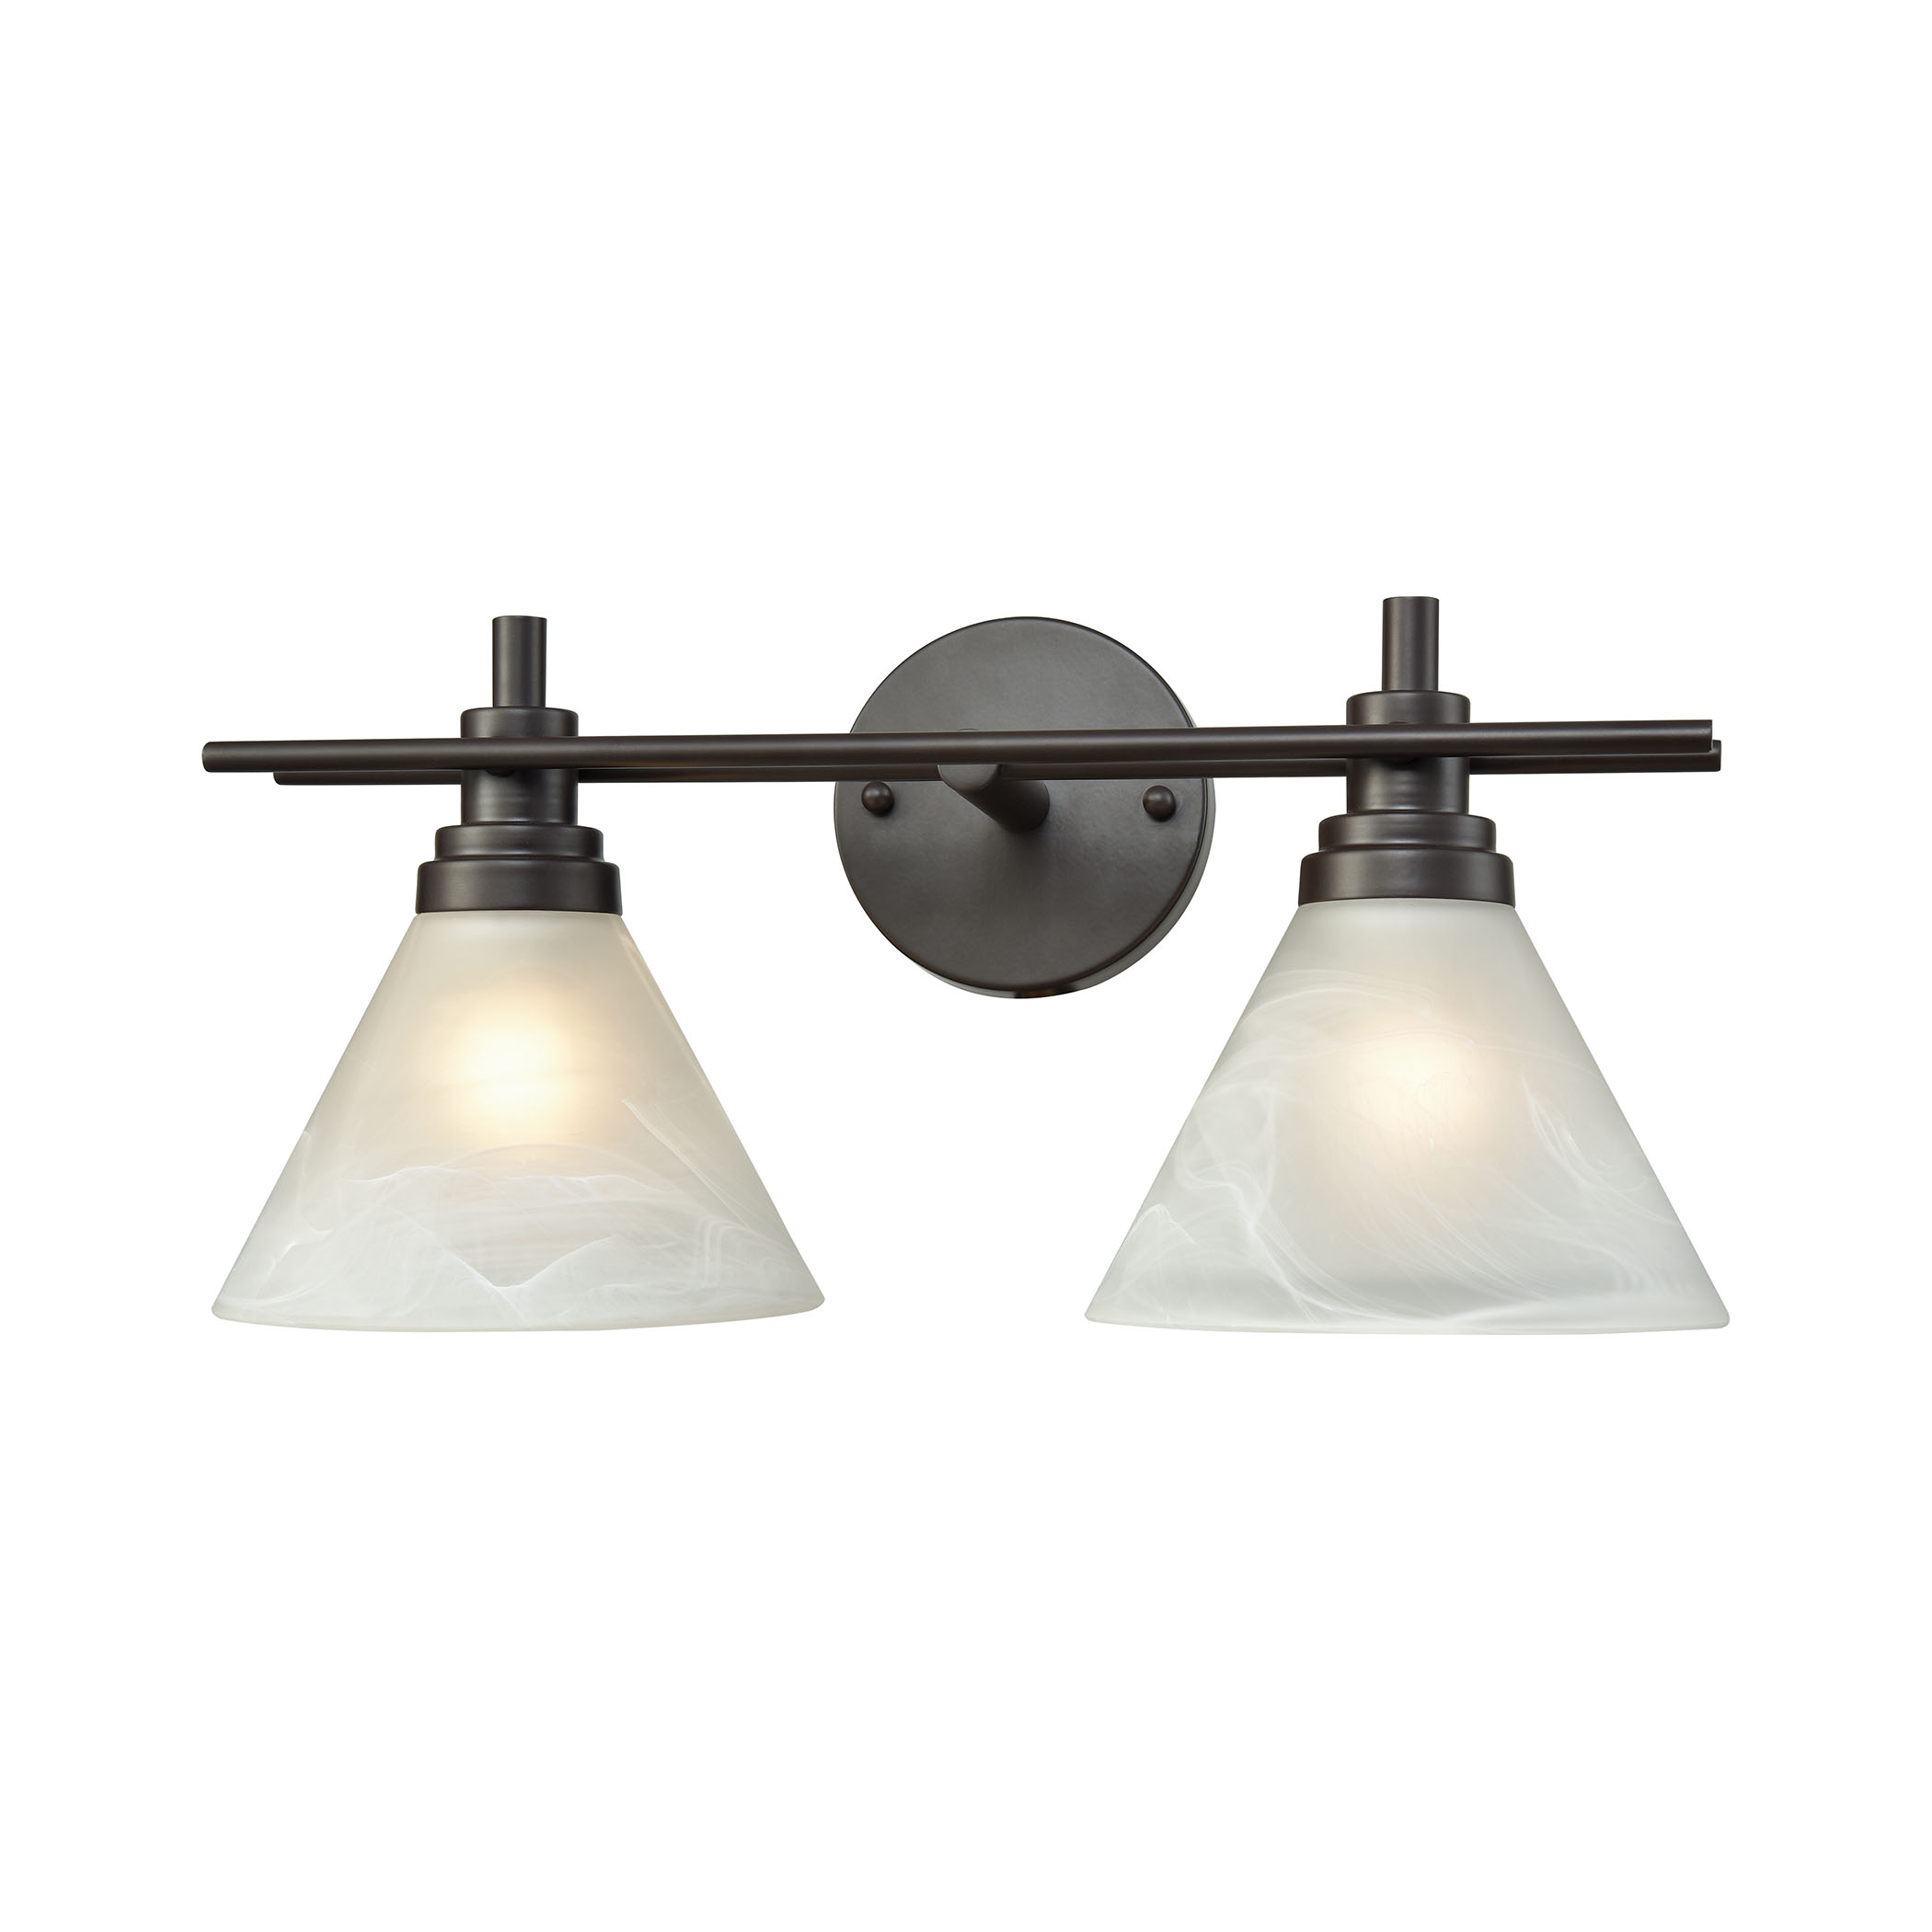 Pemberton 2 Light Vanity in Oil Rubbed Bronze with White Marbleized Glass